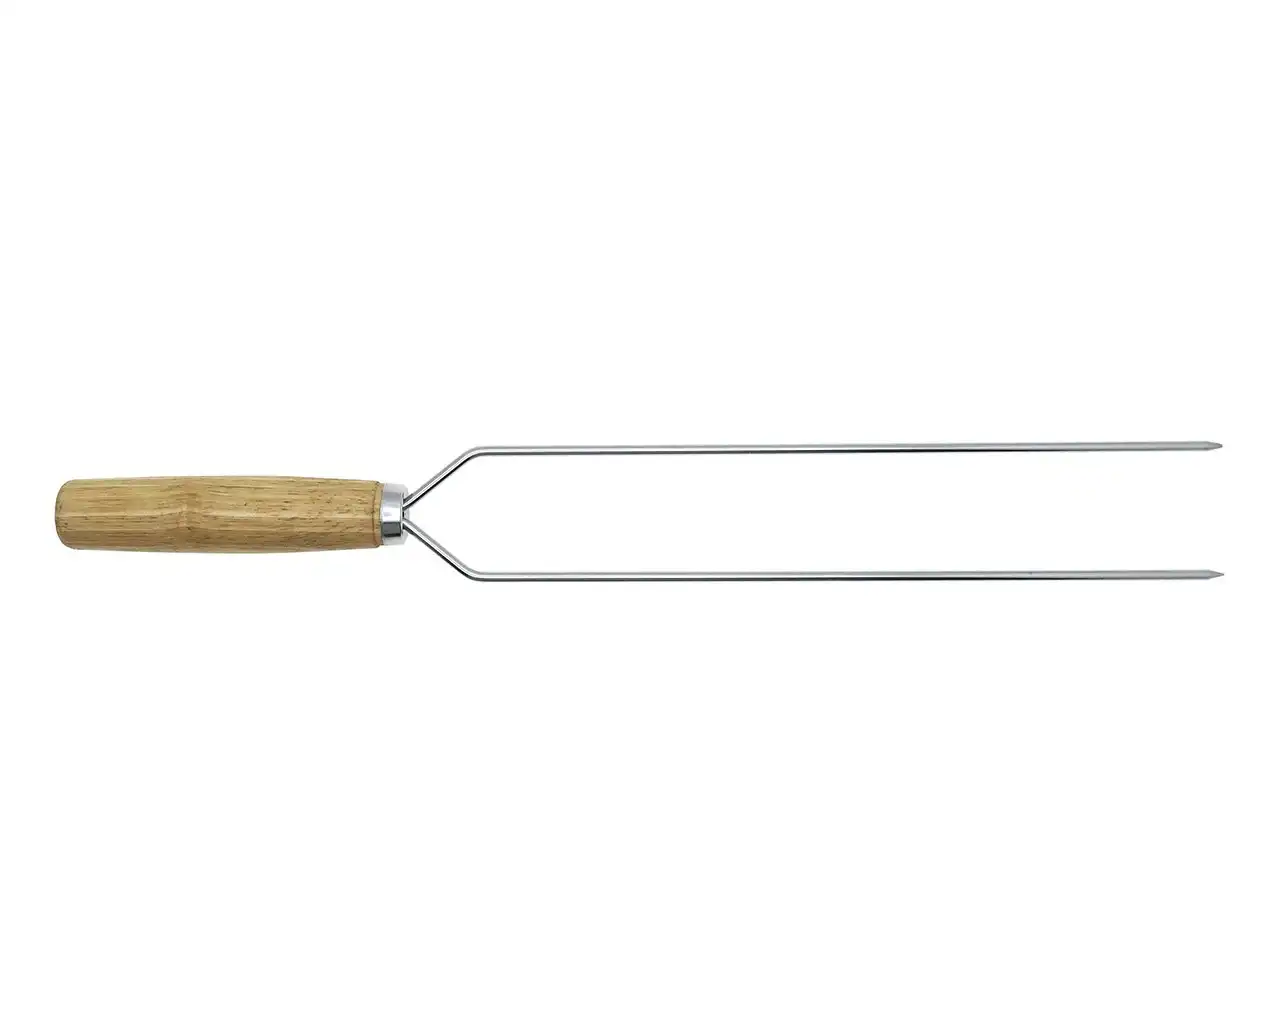 Pro Grill 45cm Double Prong Medium Skewer